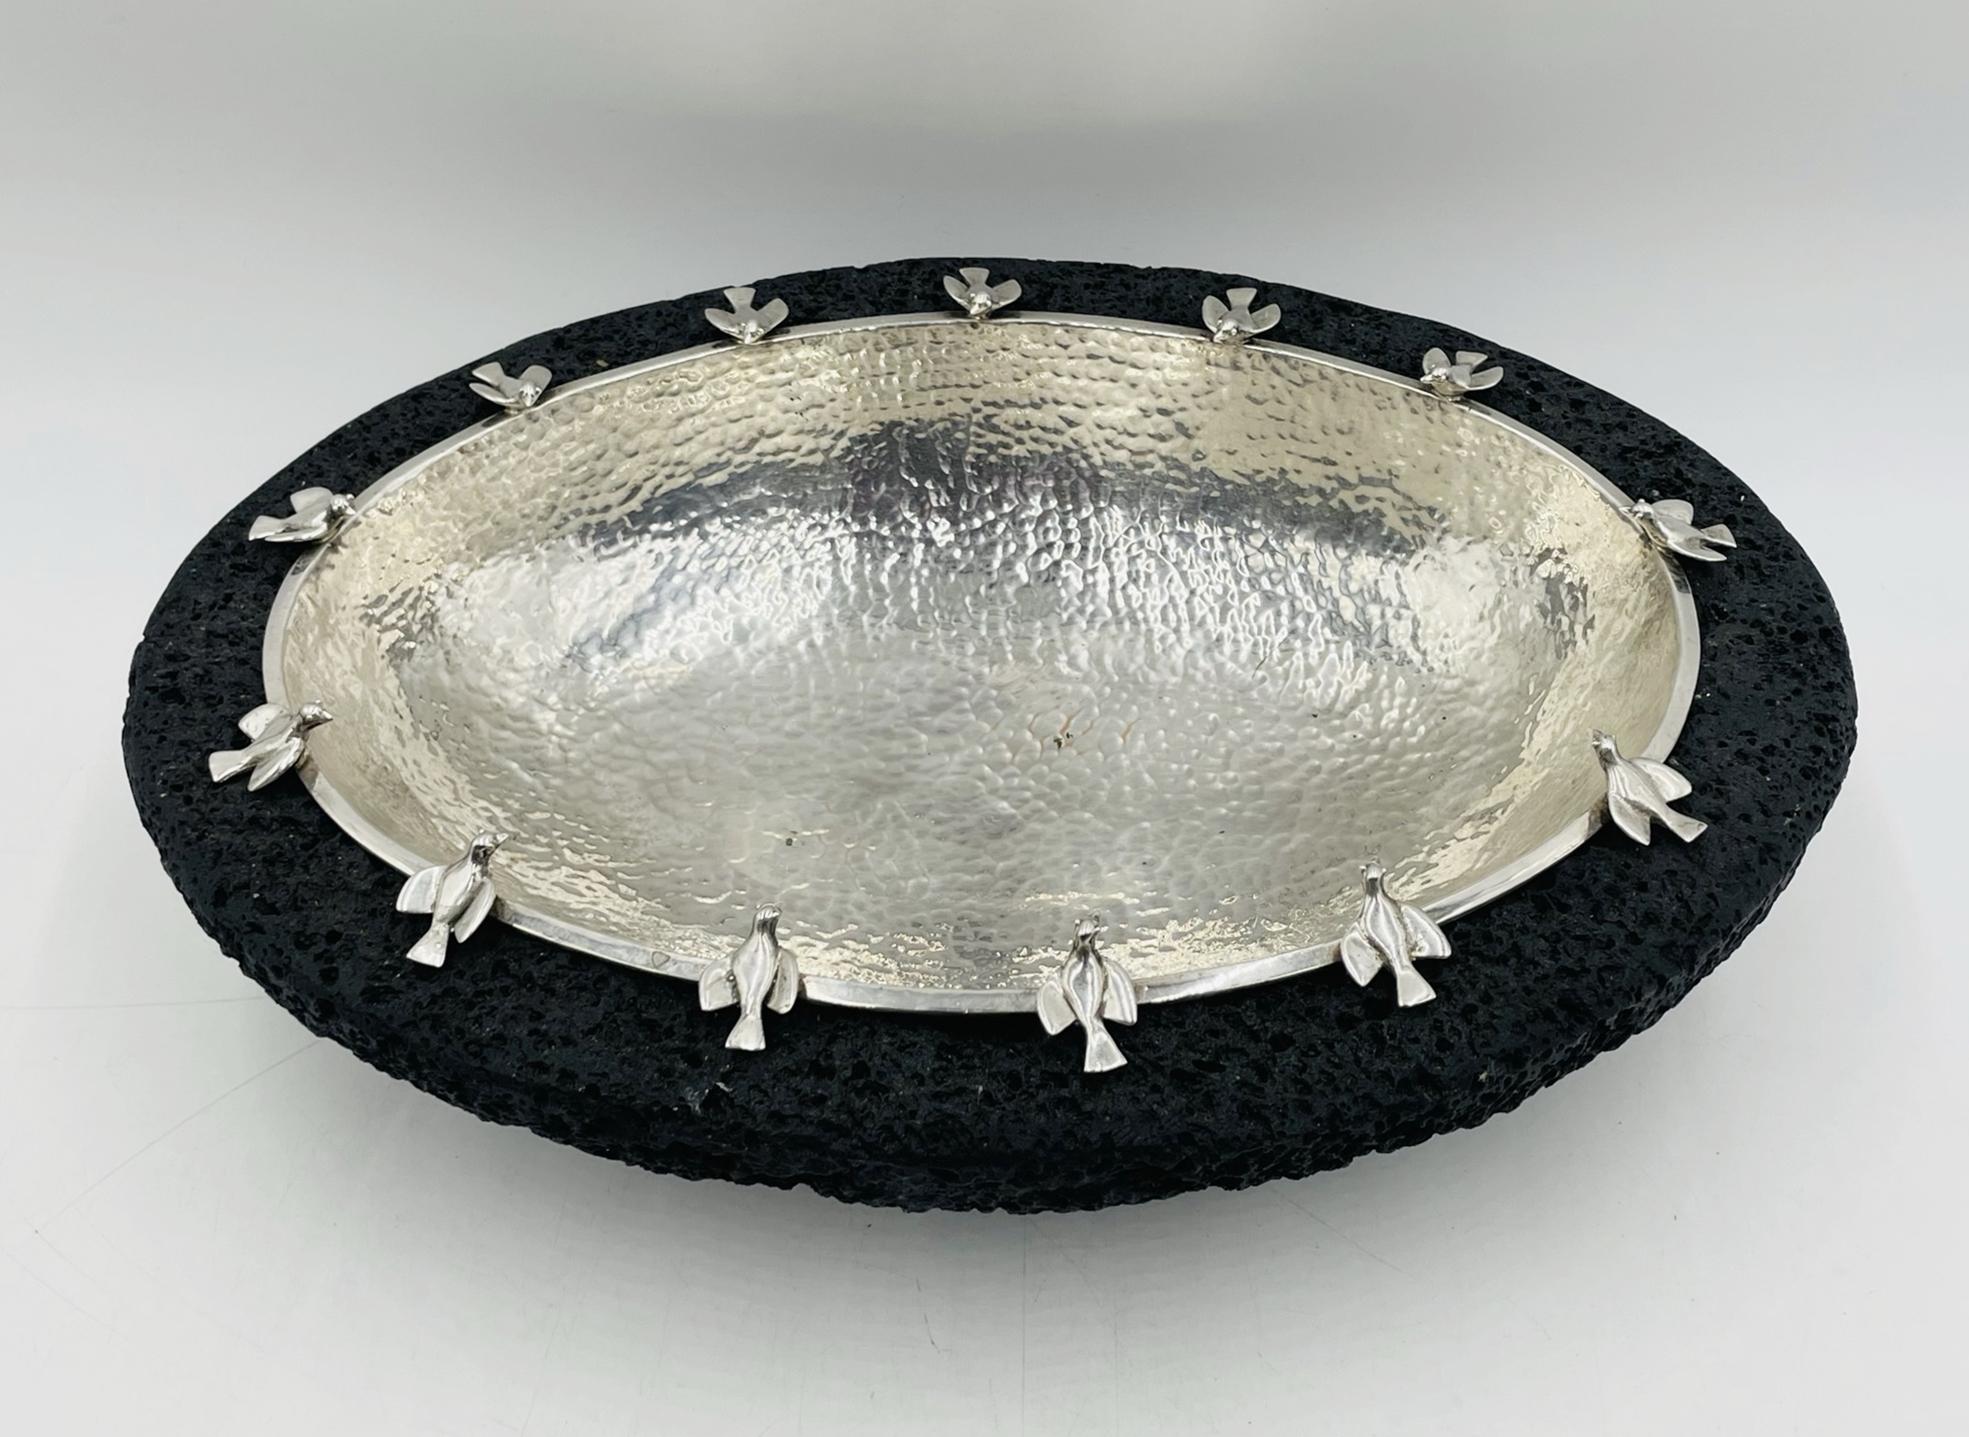 Hand-Crafted Silver-Plate Bowl with Bird Detail on Volcanic Rock baseby Emilia Castillo For Sale